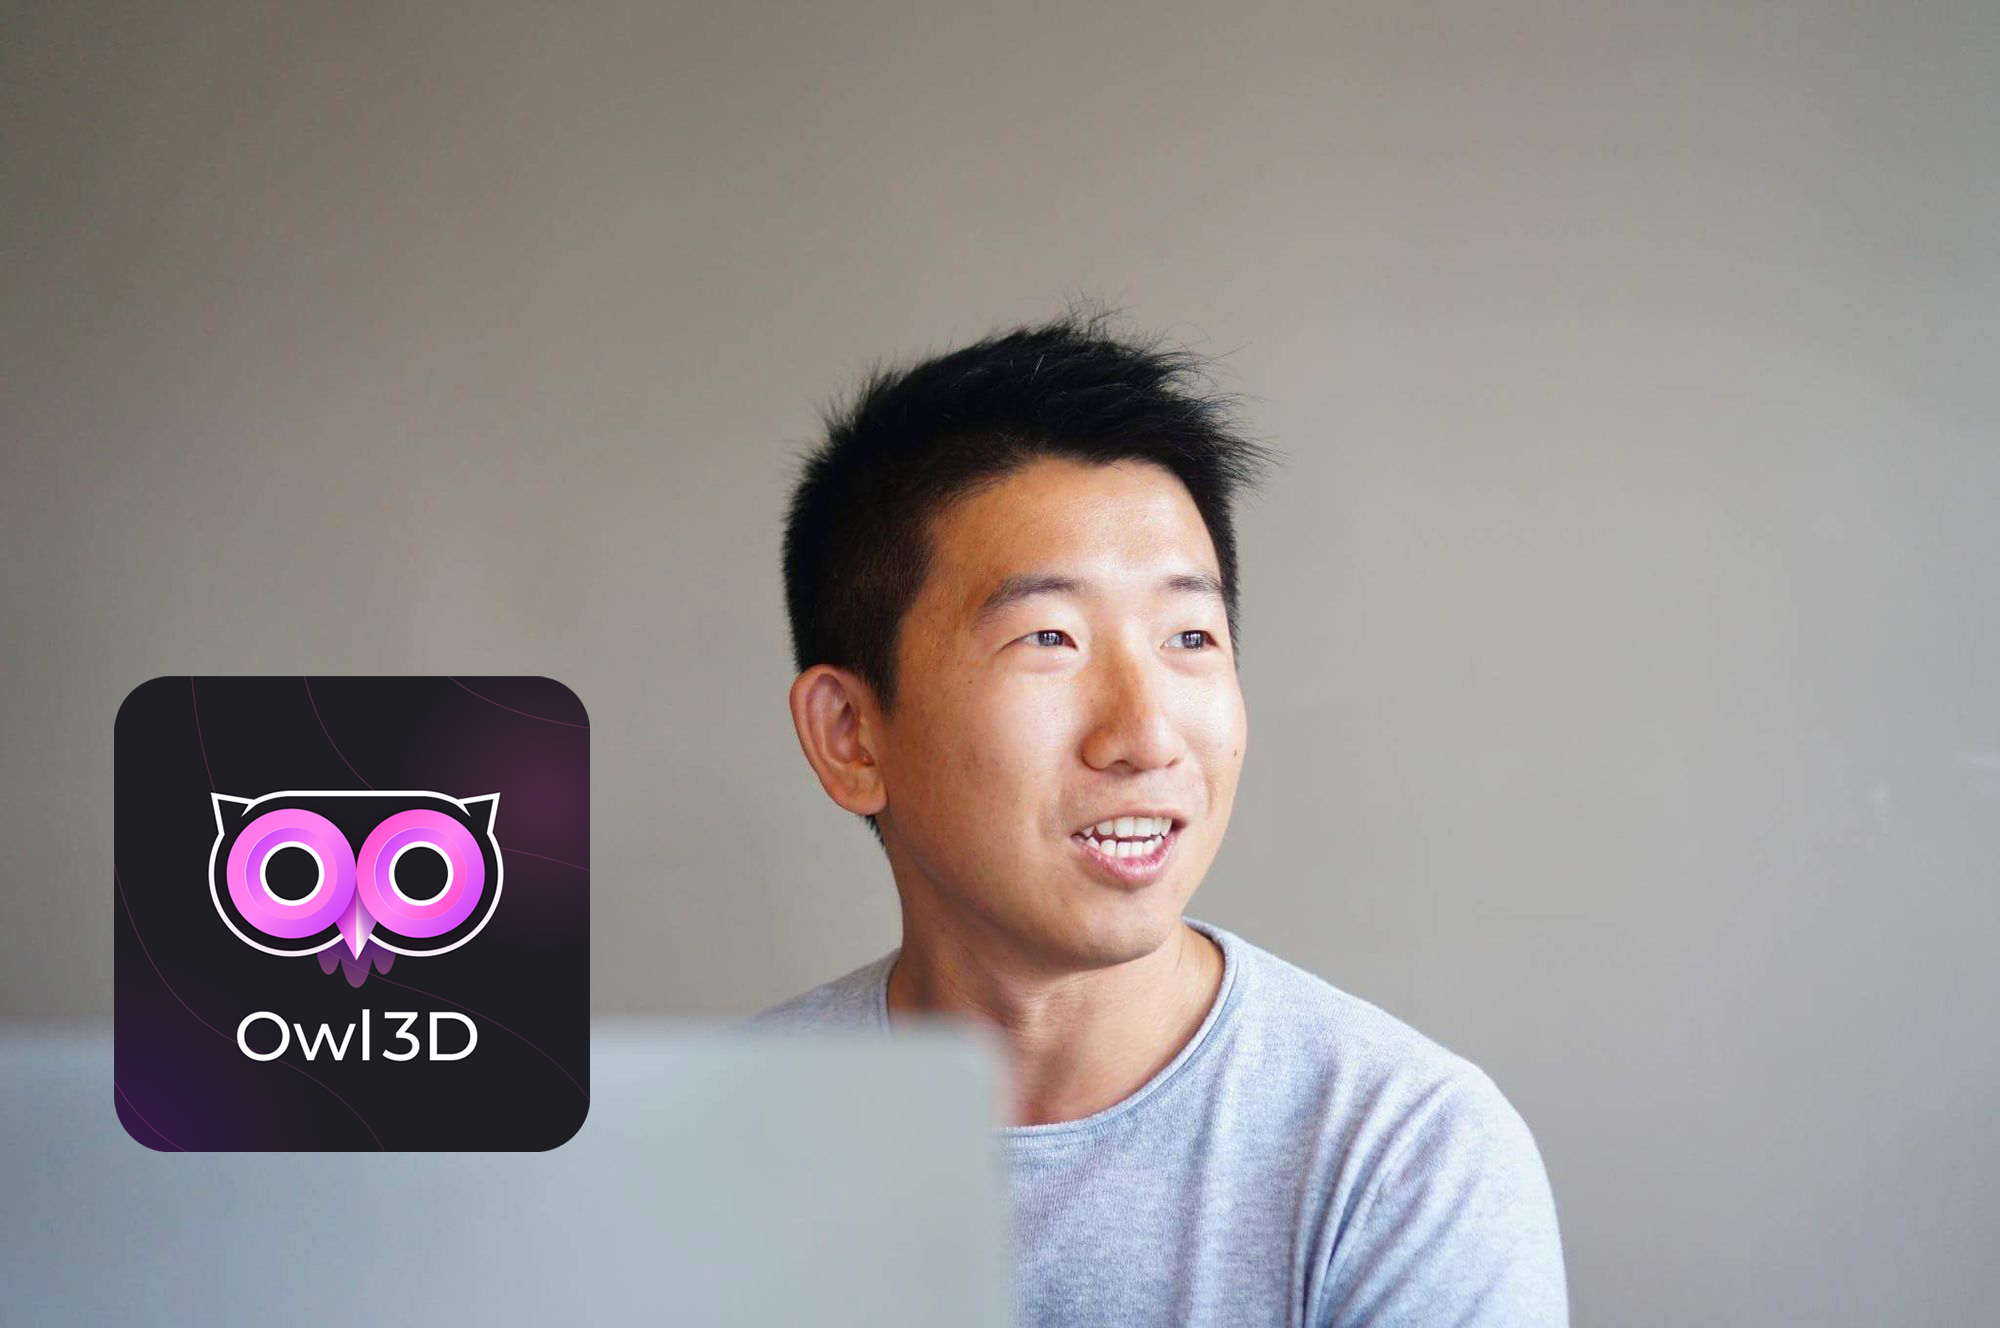 Owl3D co-founder and CEO, Leon Lu